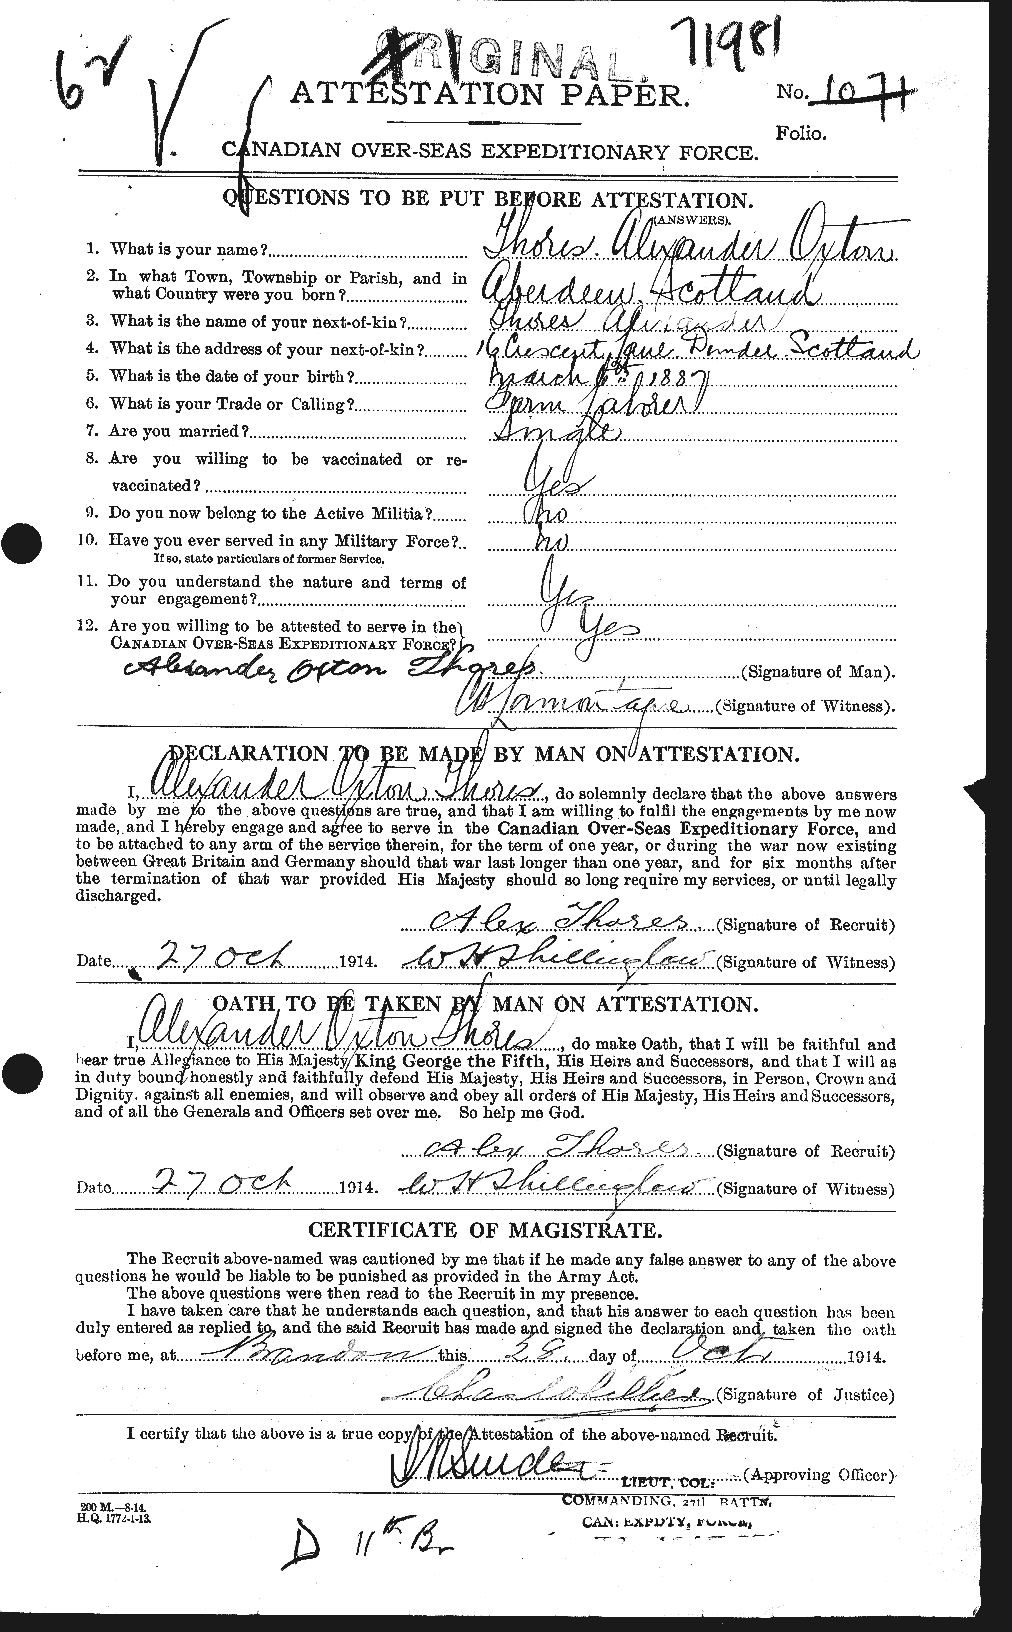 Personnel Records of the First World War - CEF 635741a